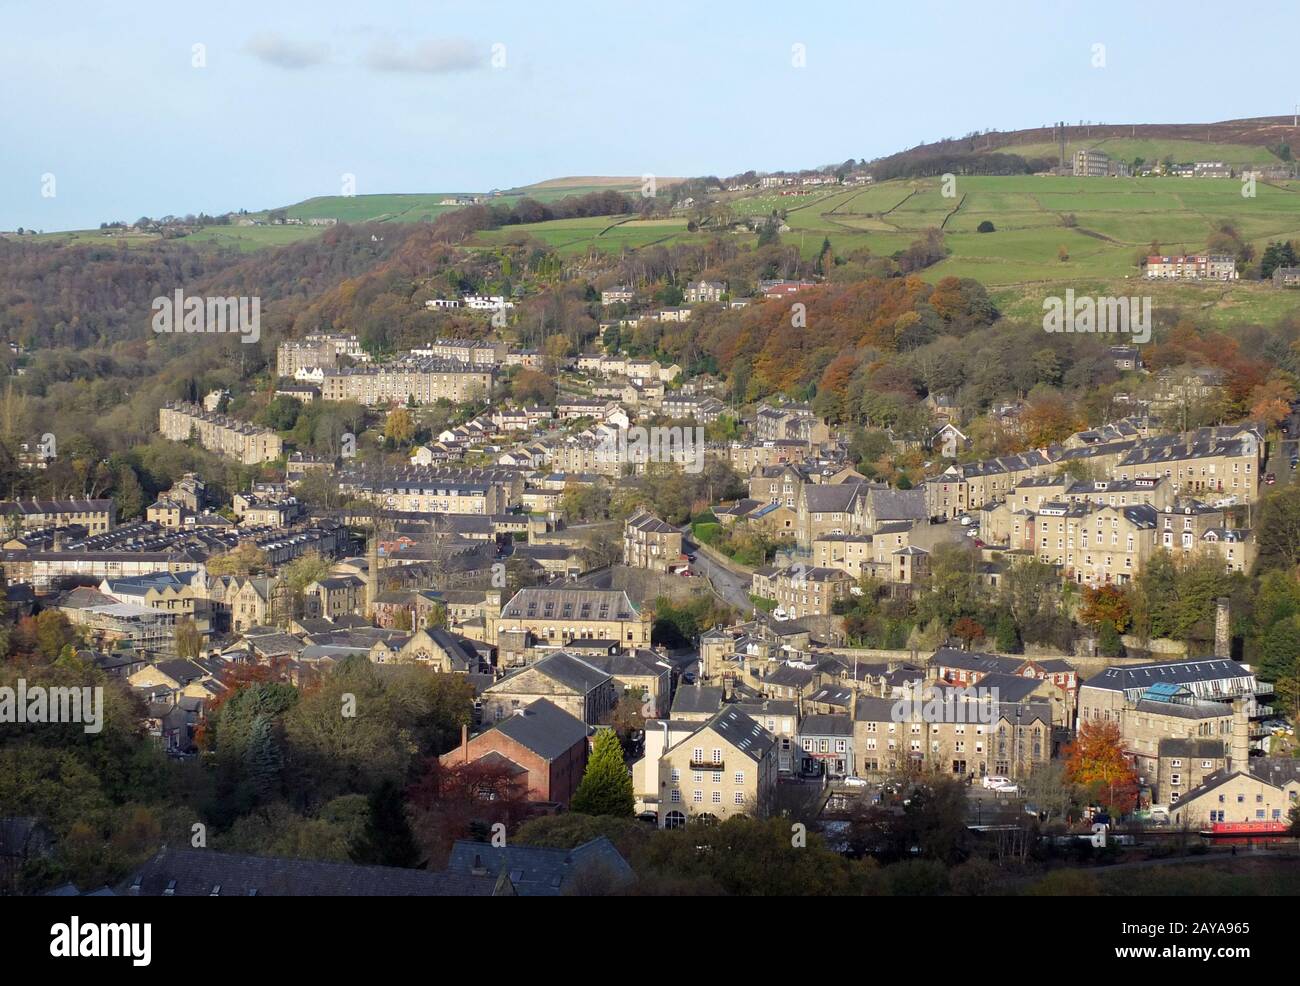 panoramic aerial view of the town of hebden bridge in west yorkshire showing the streets houses and old mill buildings set in th Stock Photo